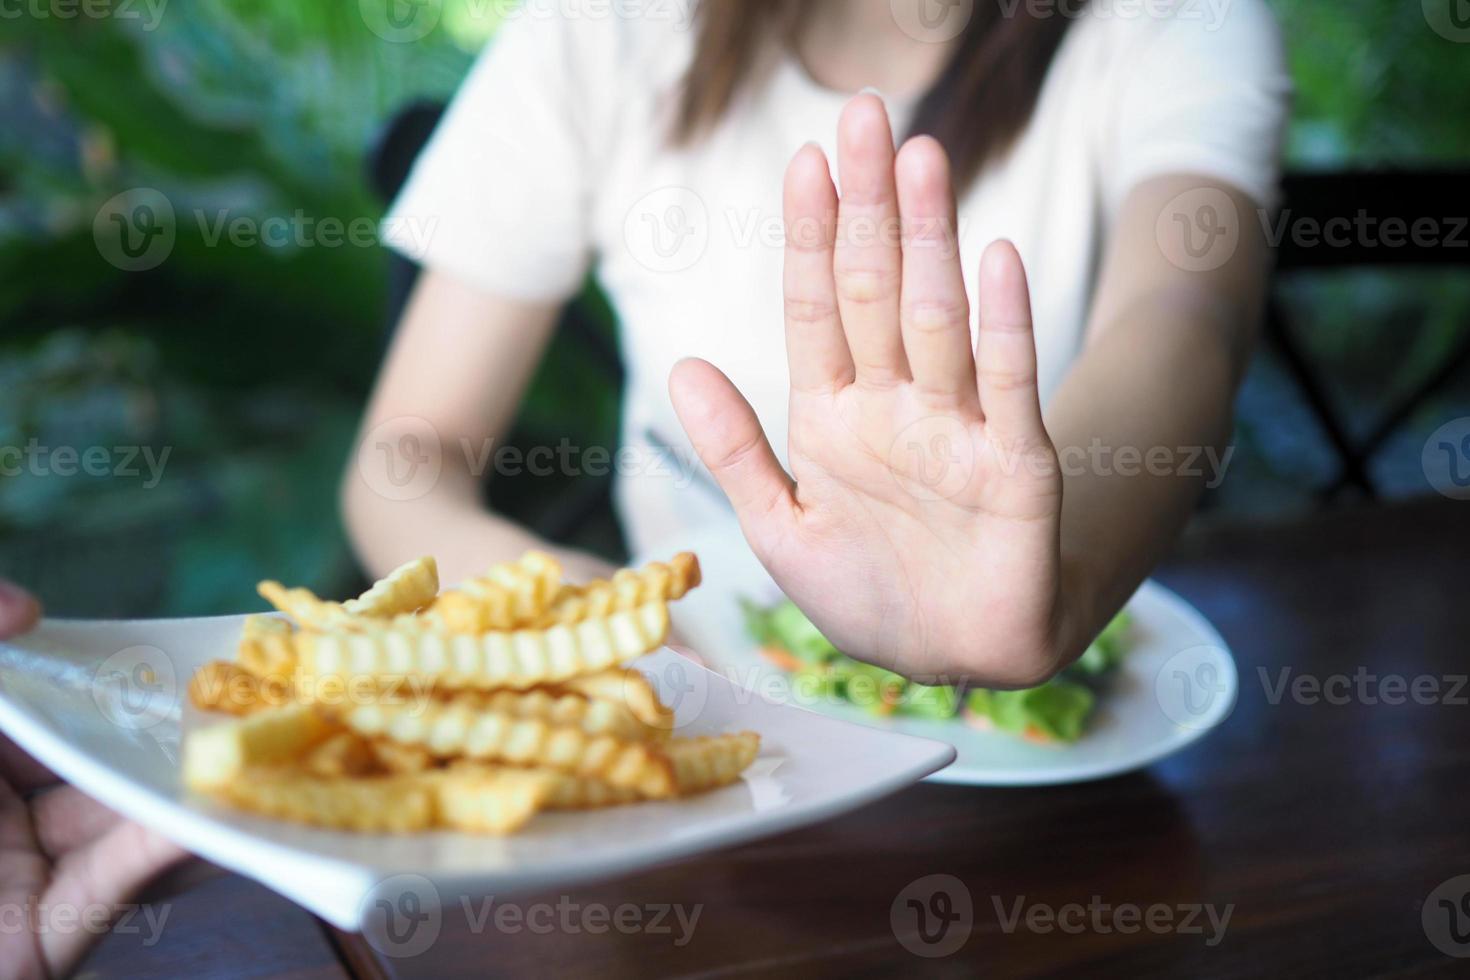 Women refuse to eat fried or french fries for weight loss and good health. photo